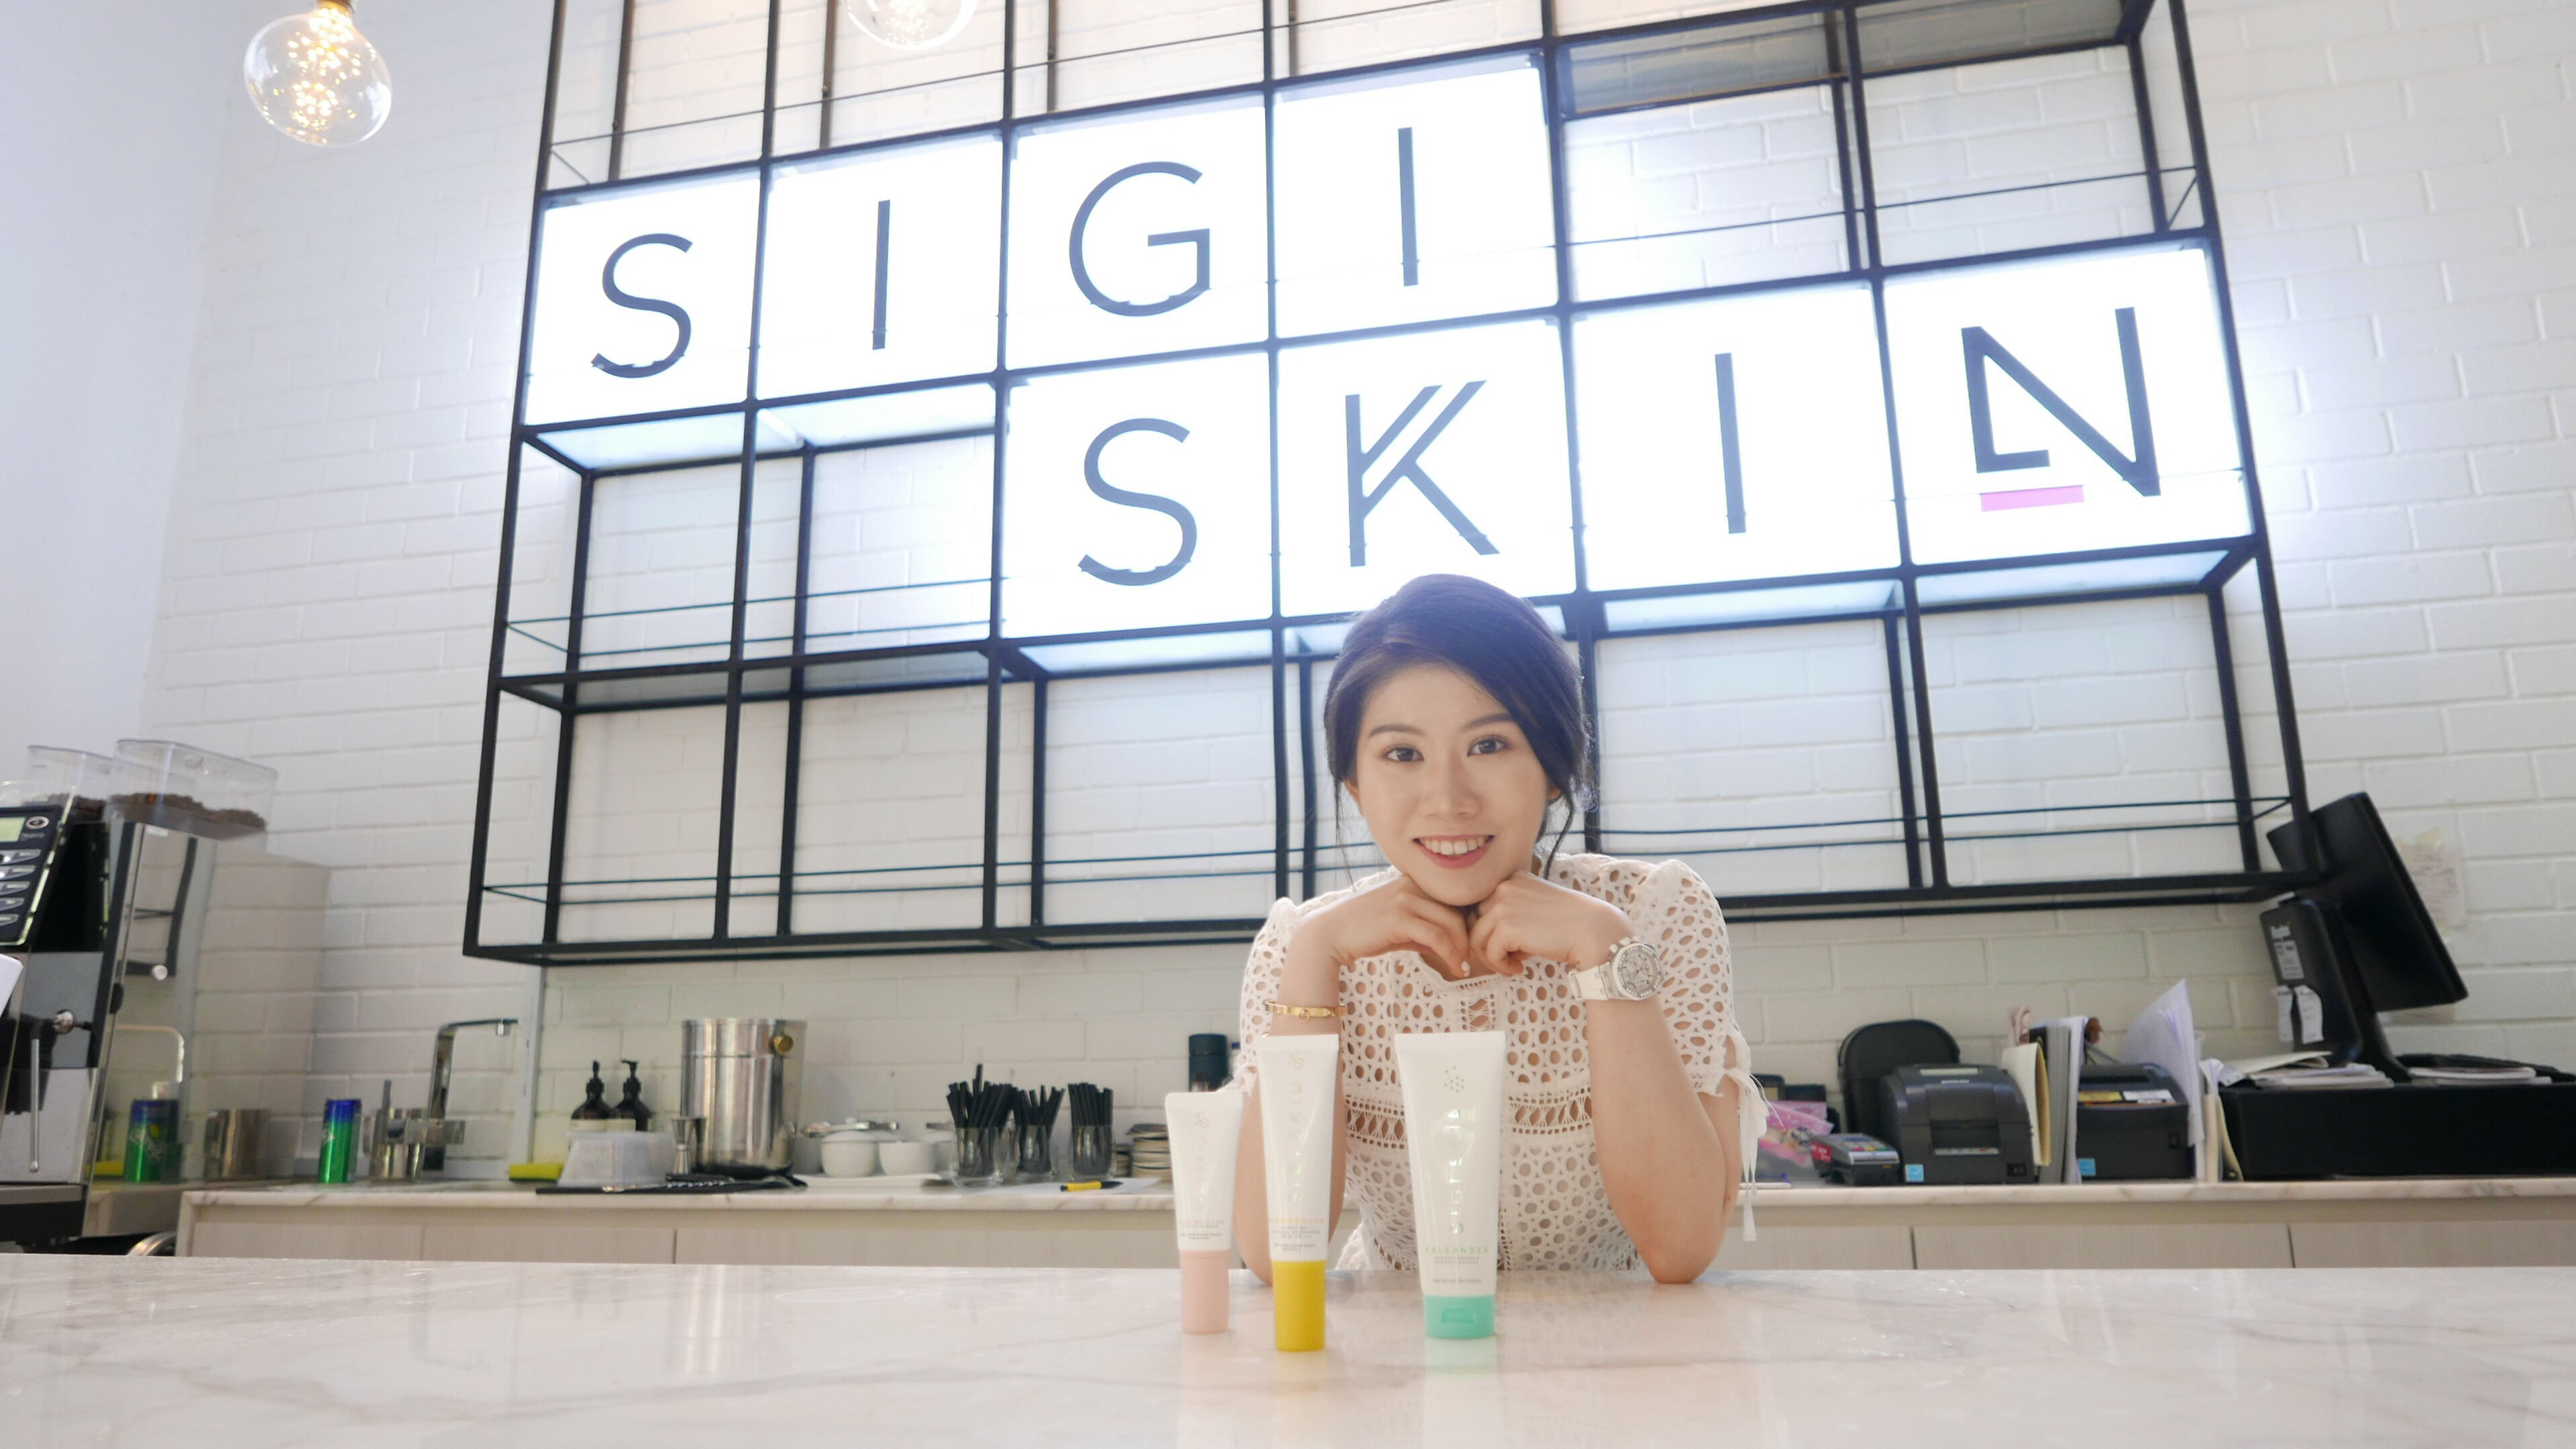 This Singapore skincare brand is going to simplify your skincare routine